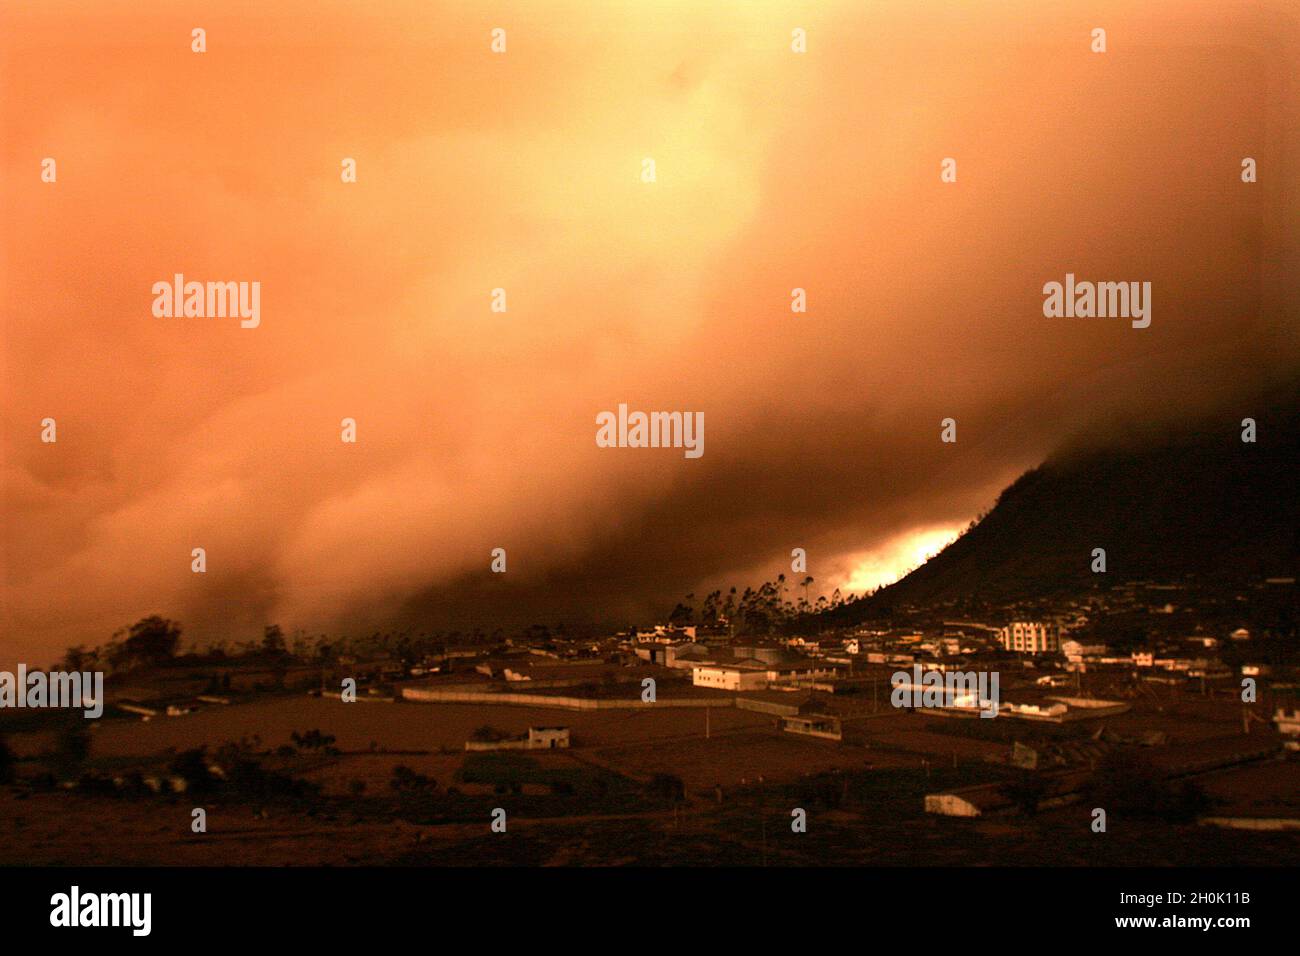 The ‘Tungurahua’, an active volcano, in the ‘Cordillera Central’ (a chain of mountains, in the Andes) of Ecuador, erupted on July 14th and August 16th of 2006, devastating life in the small towns on its slope and surroundings. A “river of fire” was formed by over 10 million cubic meters of ash, gravel and incandescent material. More than 3000 people were evacuated from the area with six casualties and around 60 missing. With the alarm of another eruption ahead, the residents enter the emergency zone to work and take care of their homes. By nightfall they return to rest at the volcano’s feet. T Stock Photo